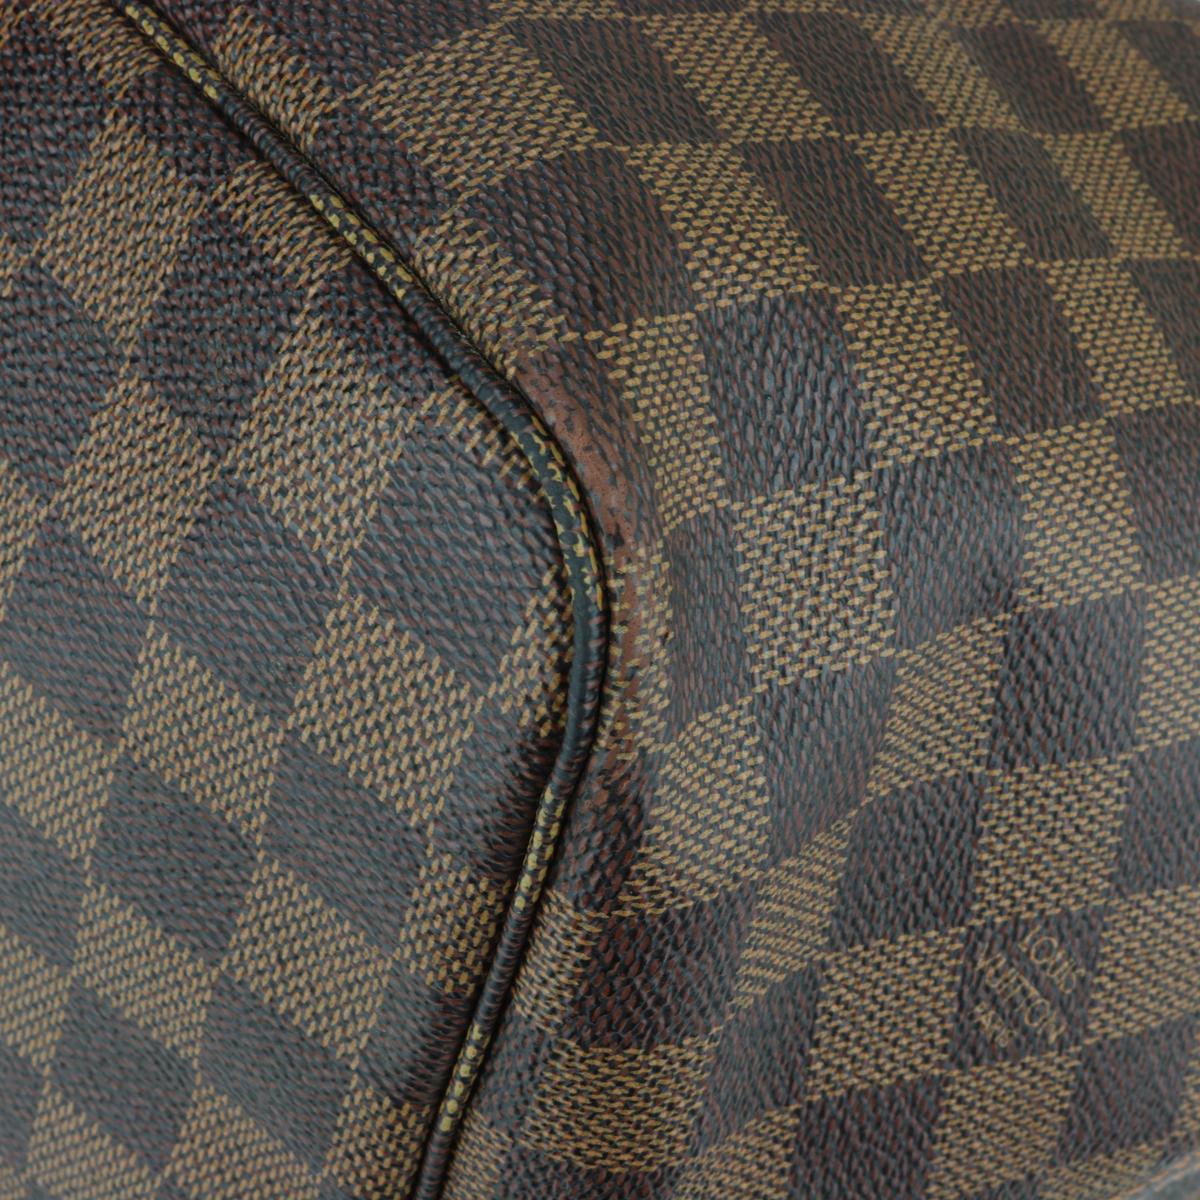 Louis Vuitton Neverfull GM Bag in Damier Ebène with Cherry Red Interior 2015 6